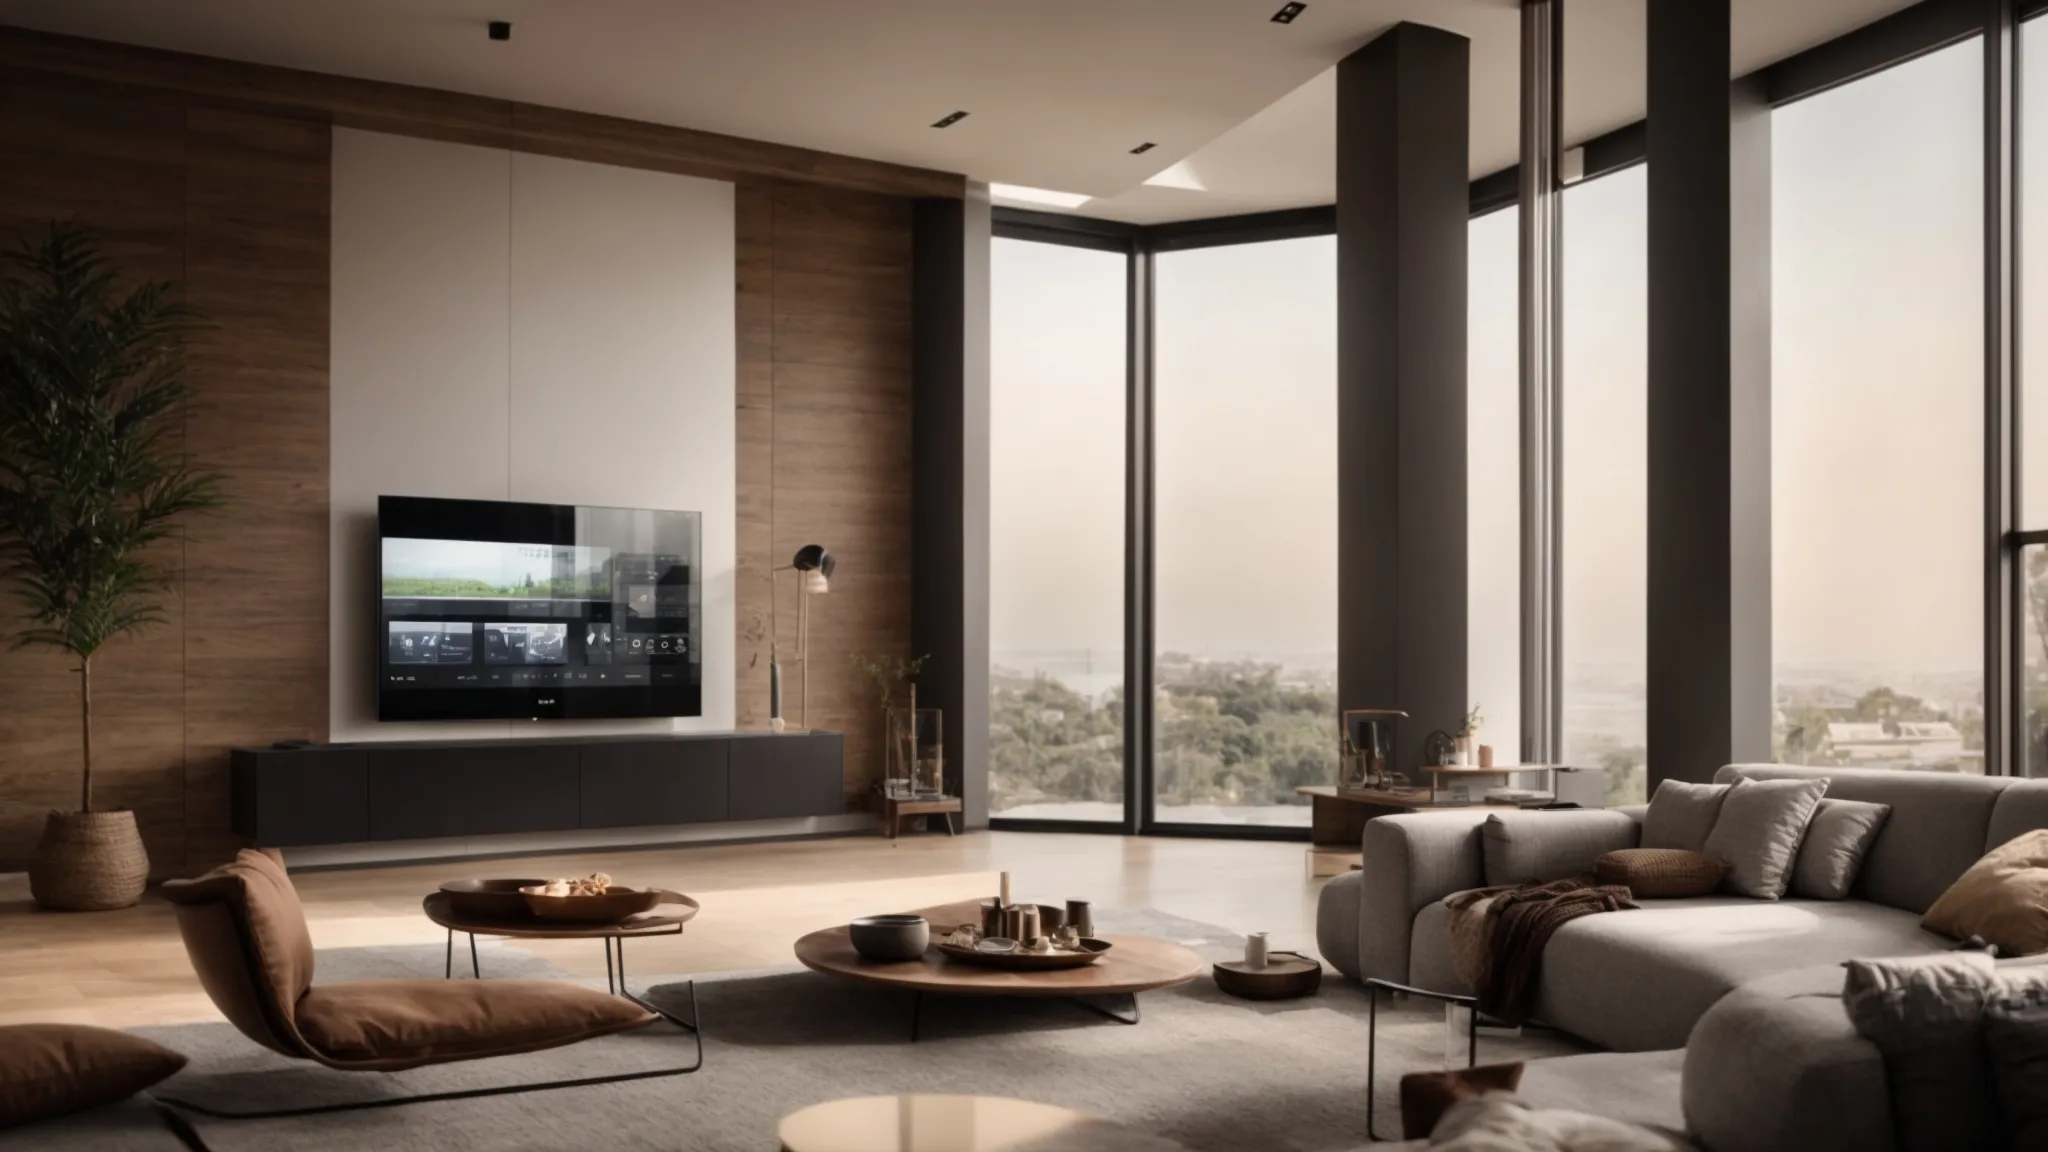 a modern living room softly lit with natural light, showcasing an elegant digital interface on a wall for controlling various smart home features.